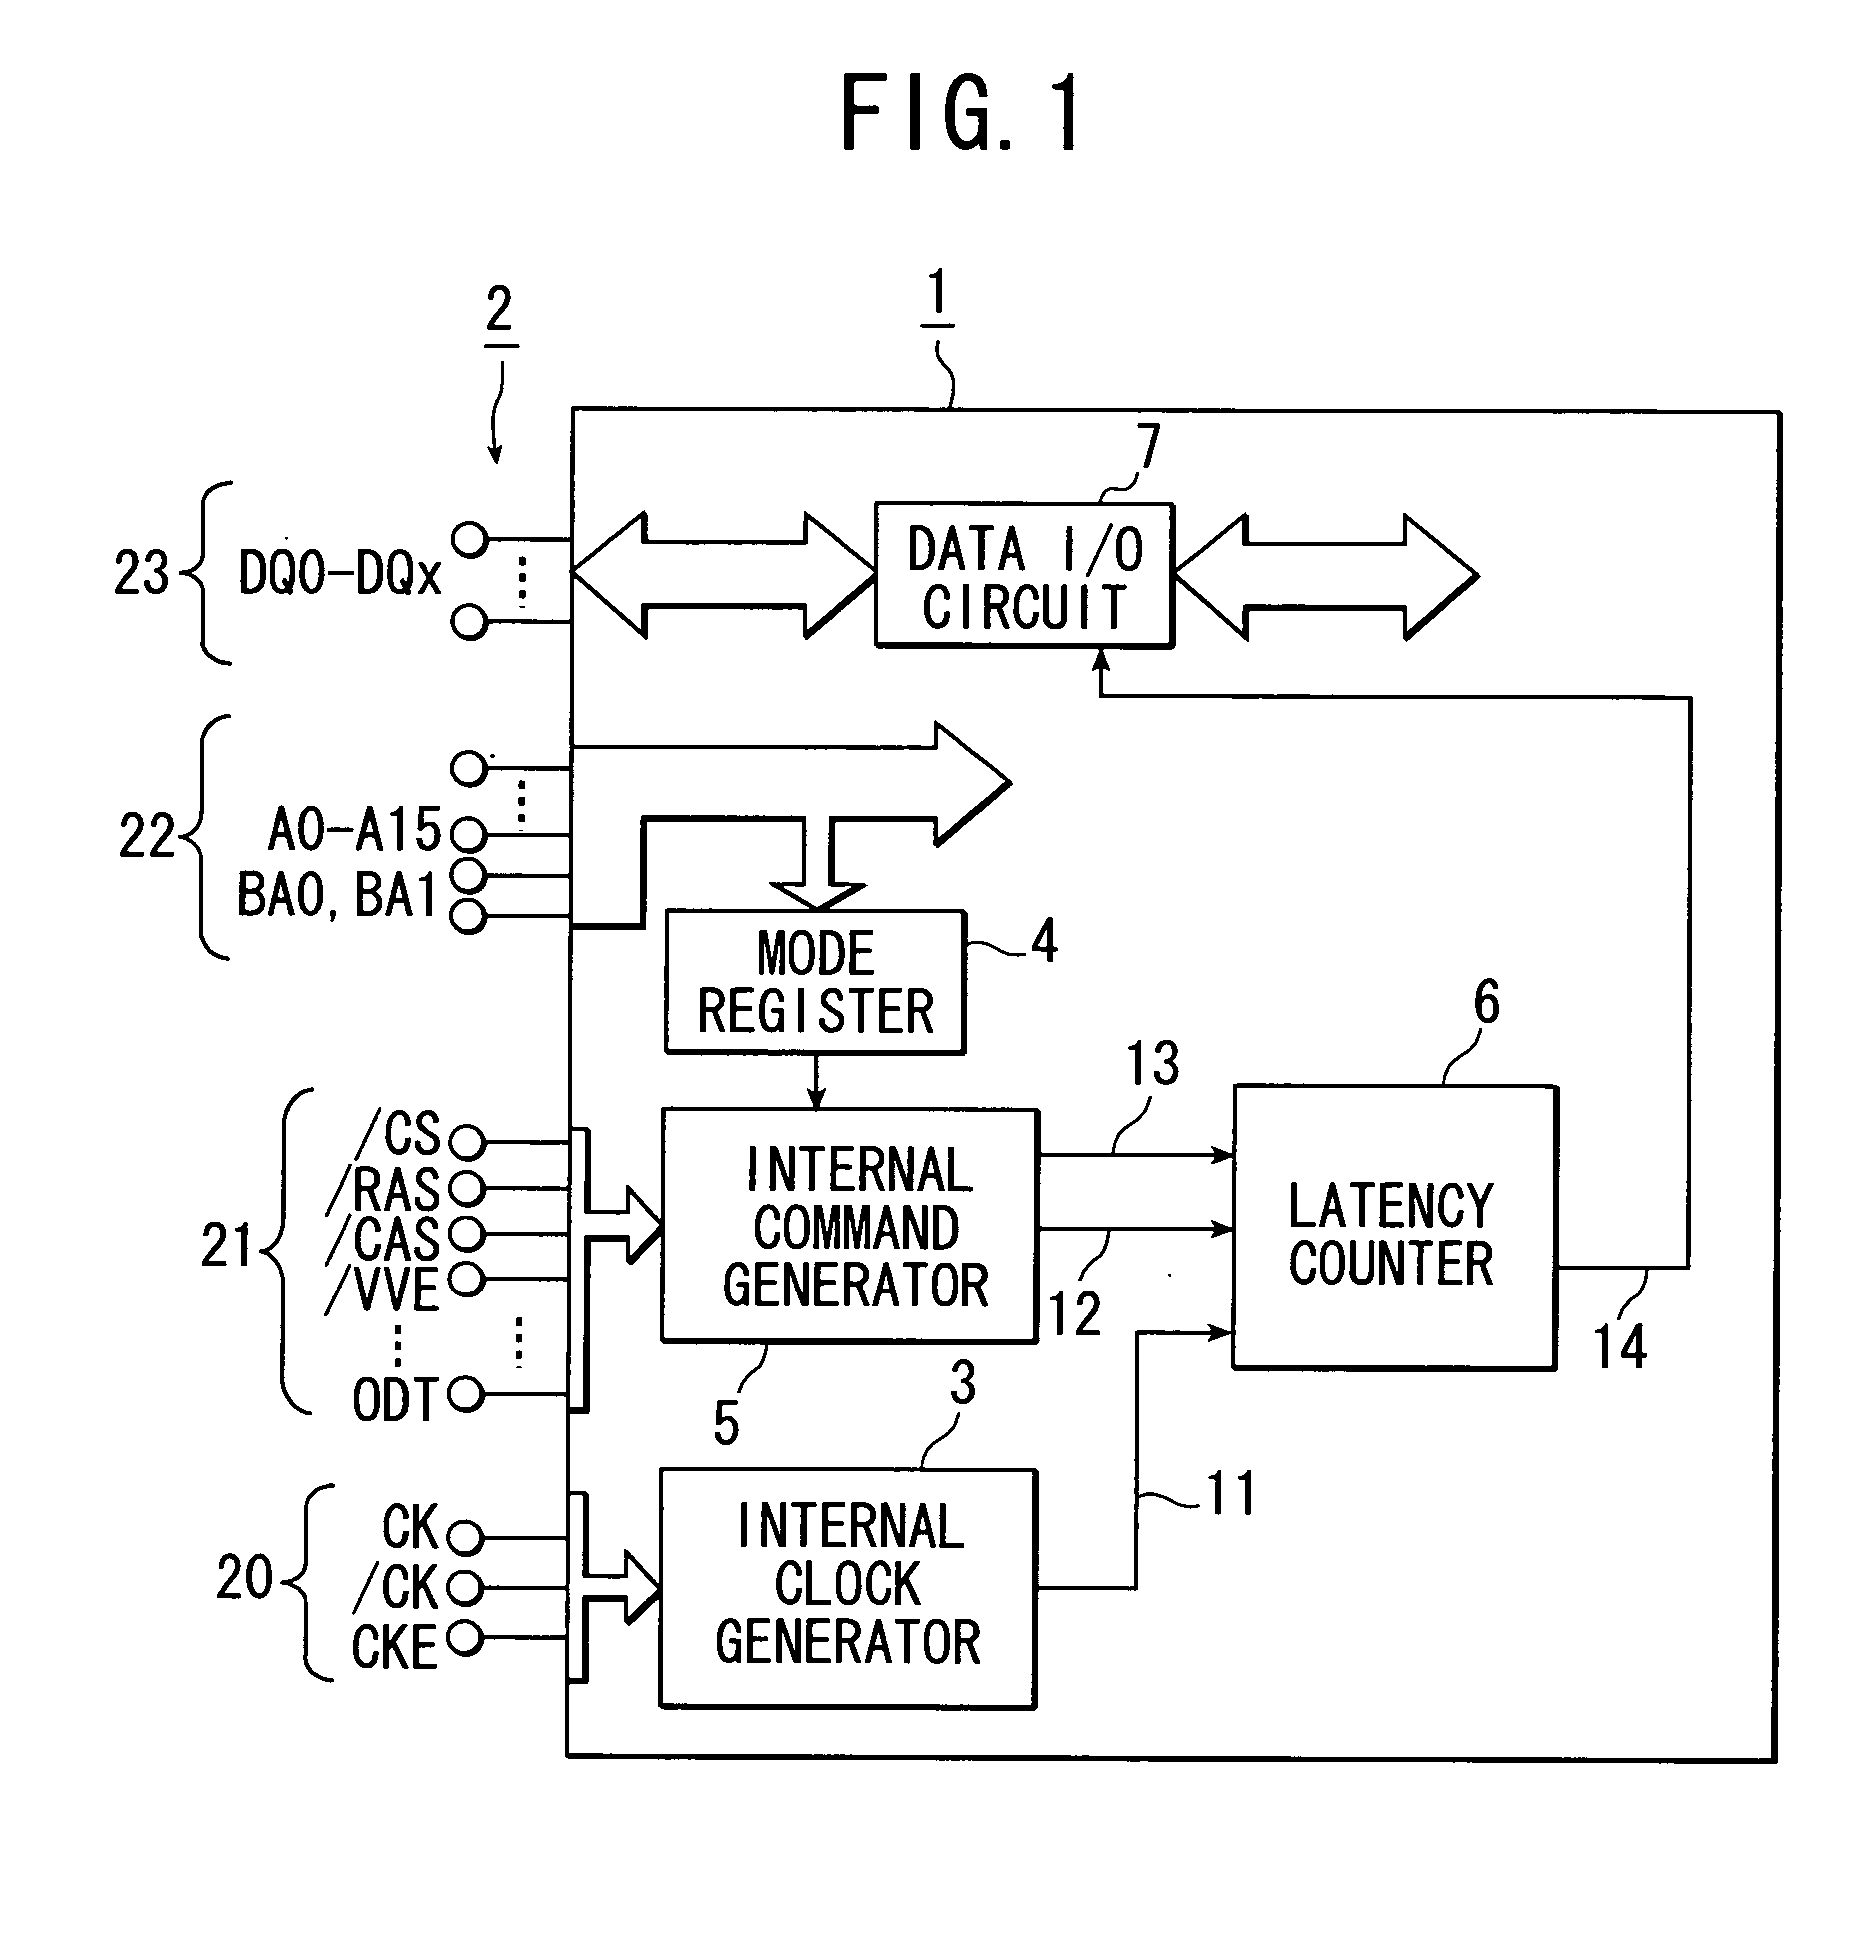 Semiconductor device with latency counter